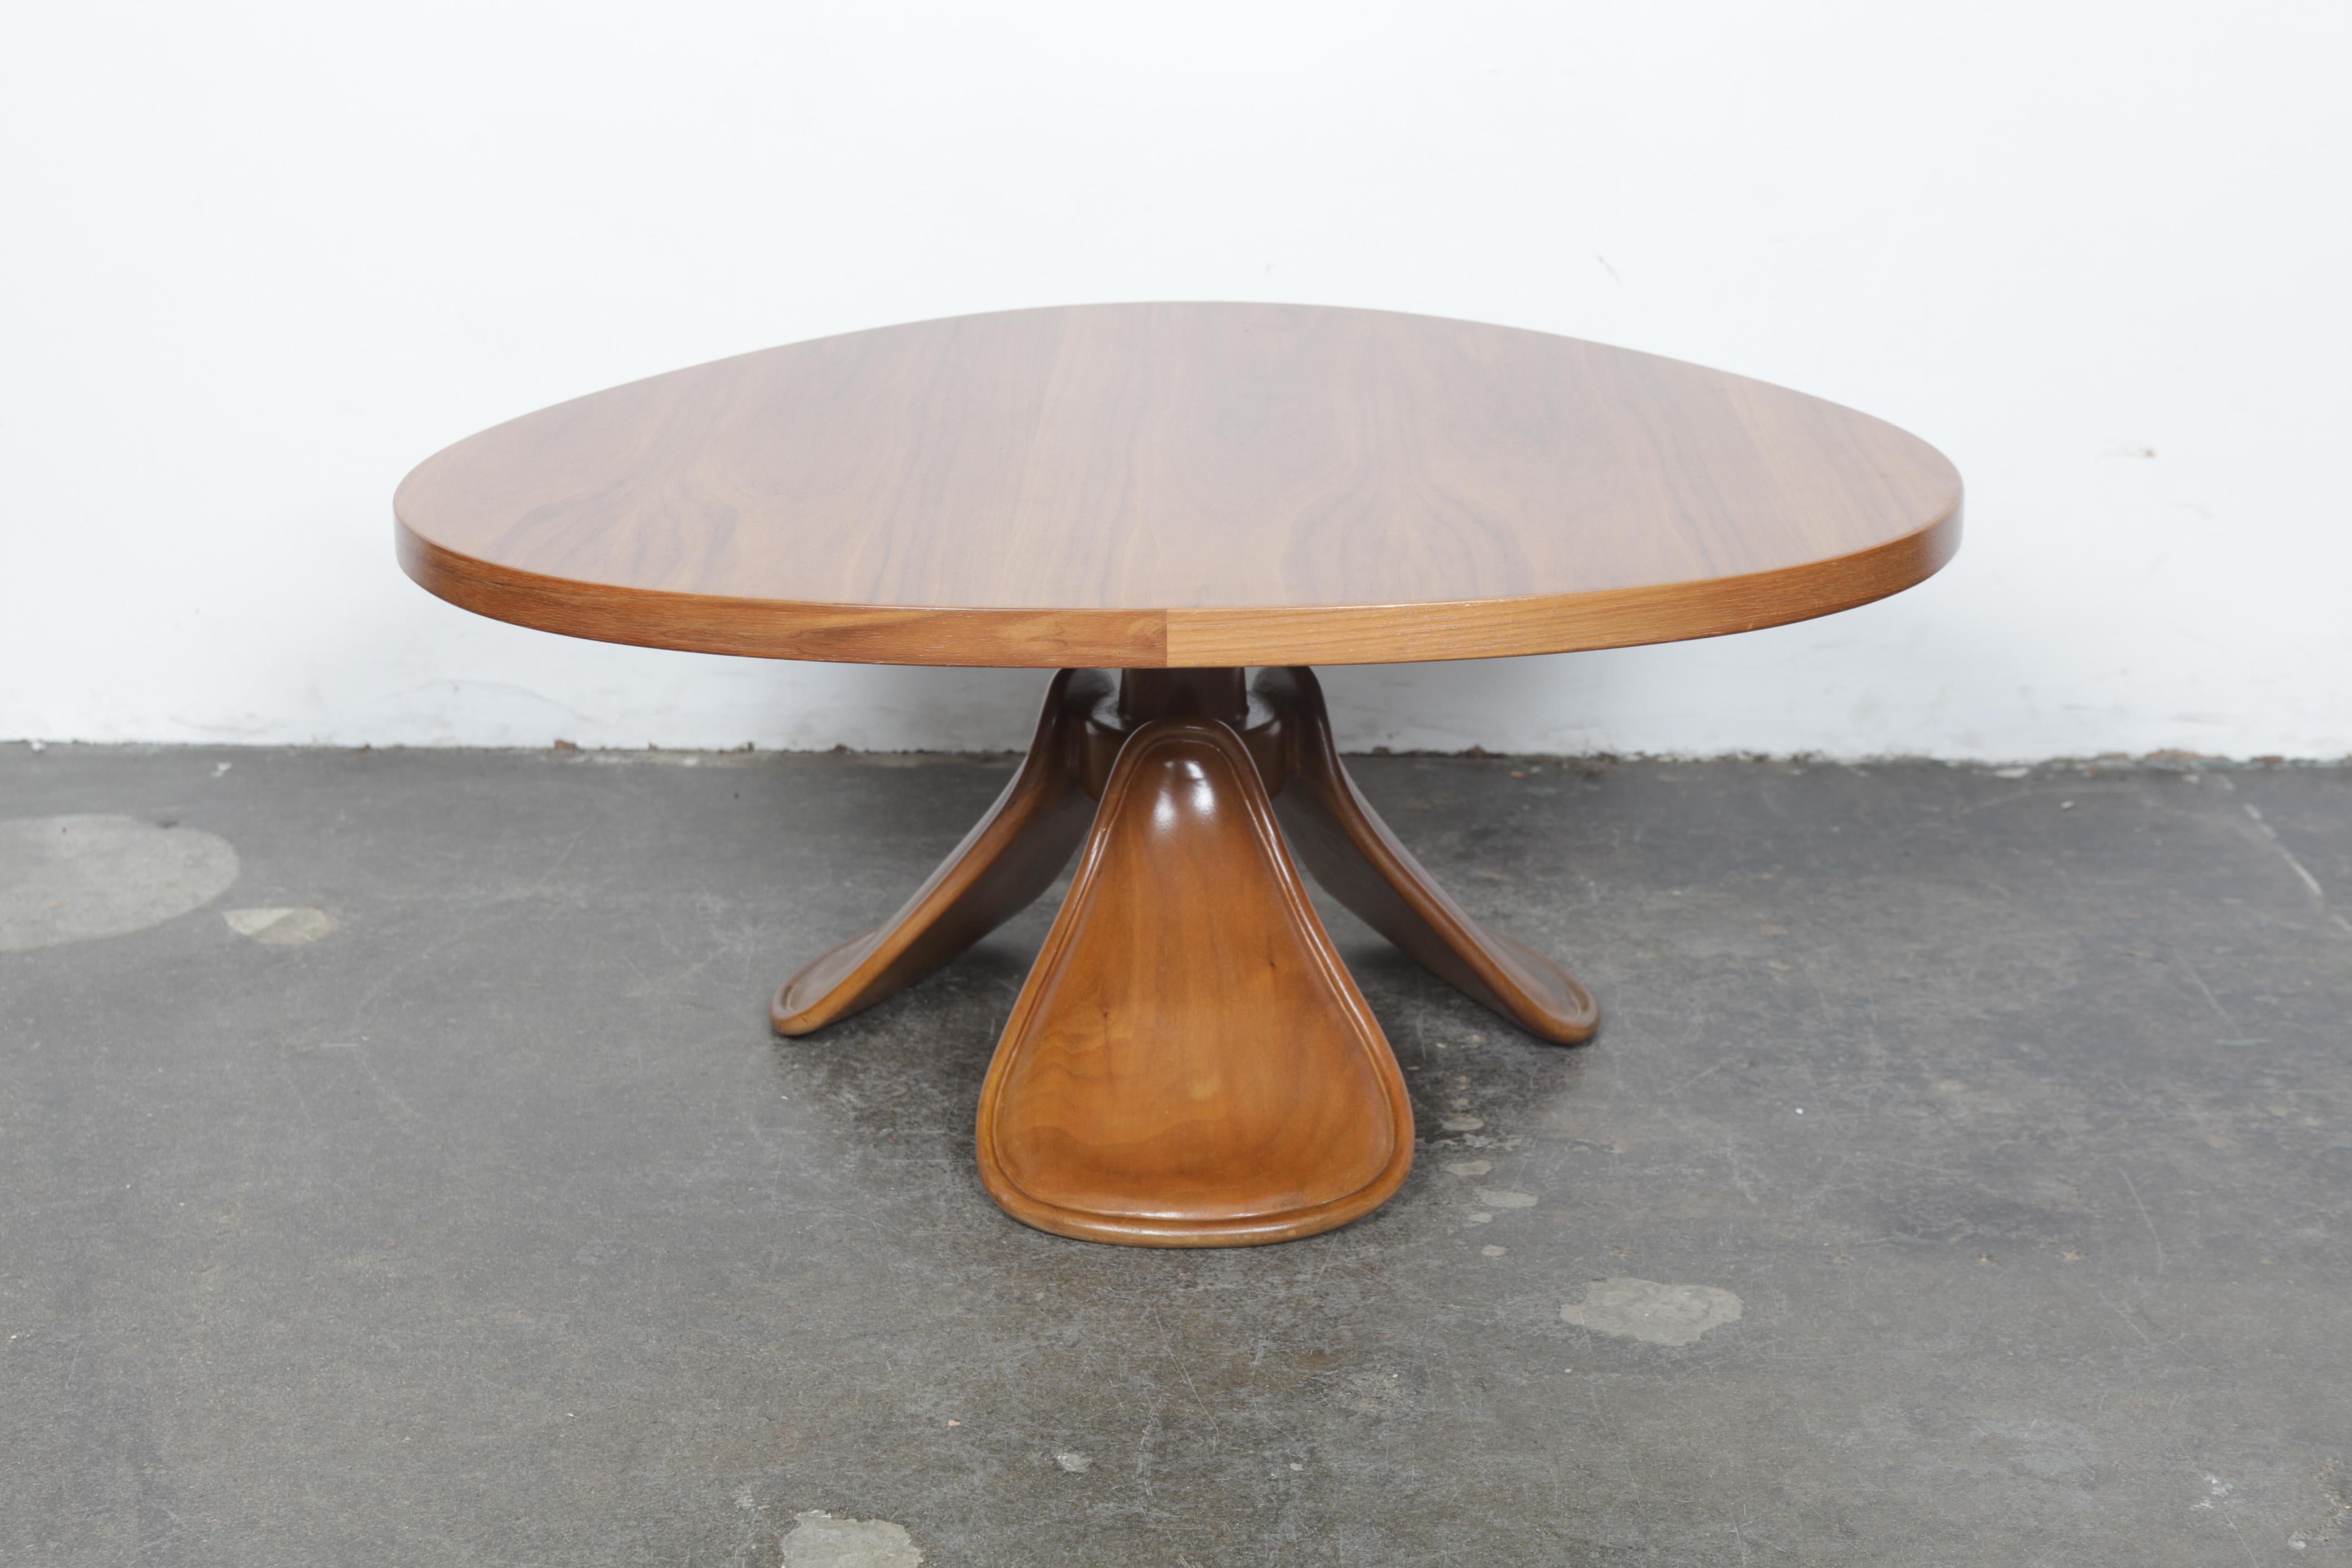 American Midcentury Walnut Coffee Table with Organic Rounded Top and Leaf Style Legs